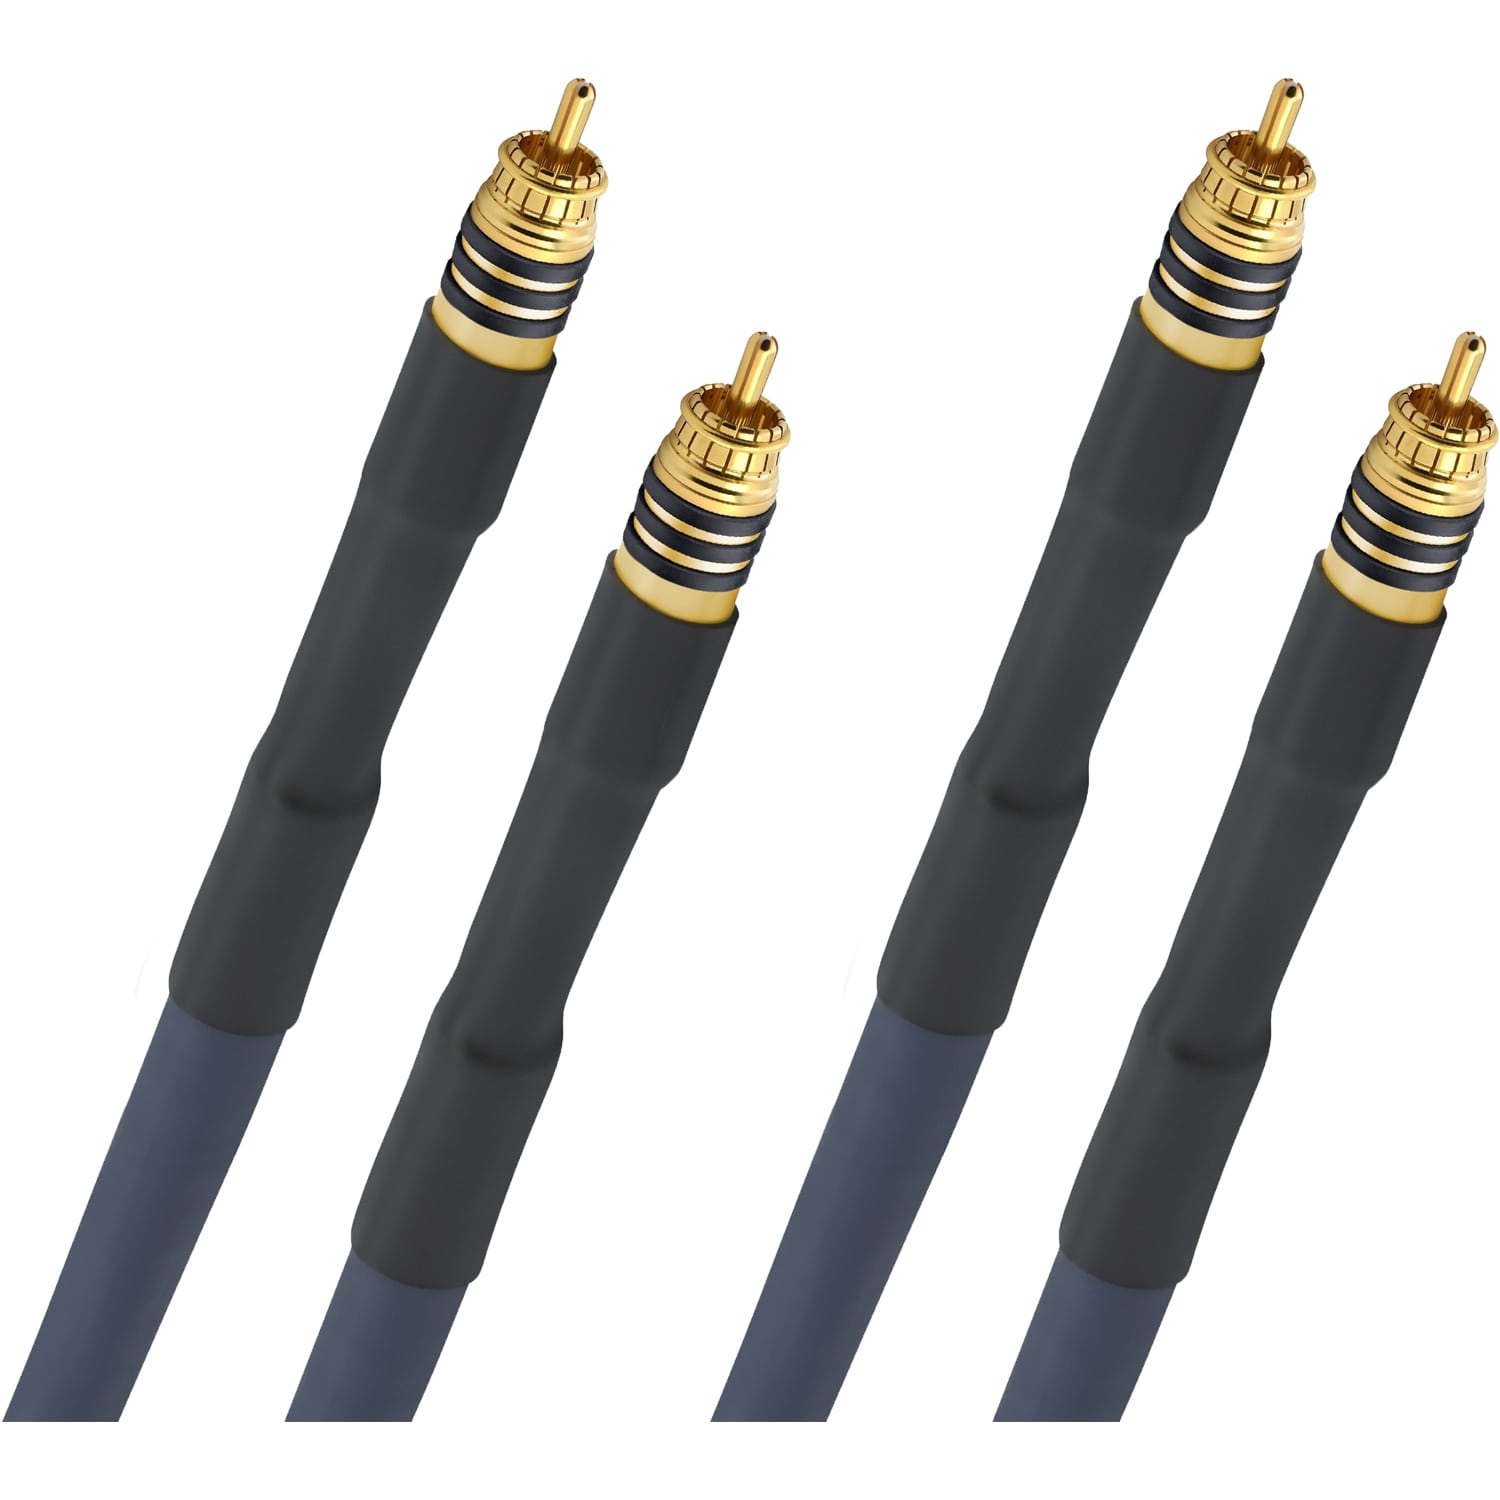 Кабели межблочные аудио Oehlbach STATE OF THE ART XXL Cable RCA, 2x1,50m, gold, D1C13114 кабели межблочные аудио oehlbach state of the art xxl cable rca 2x2 00m gold d1c13116